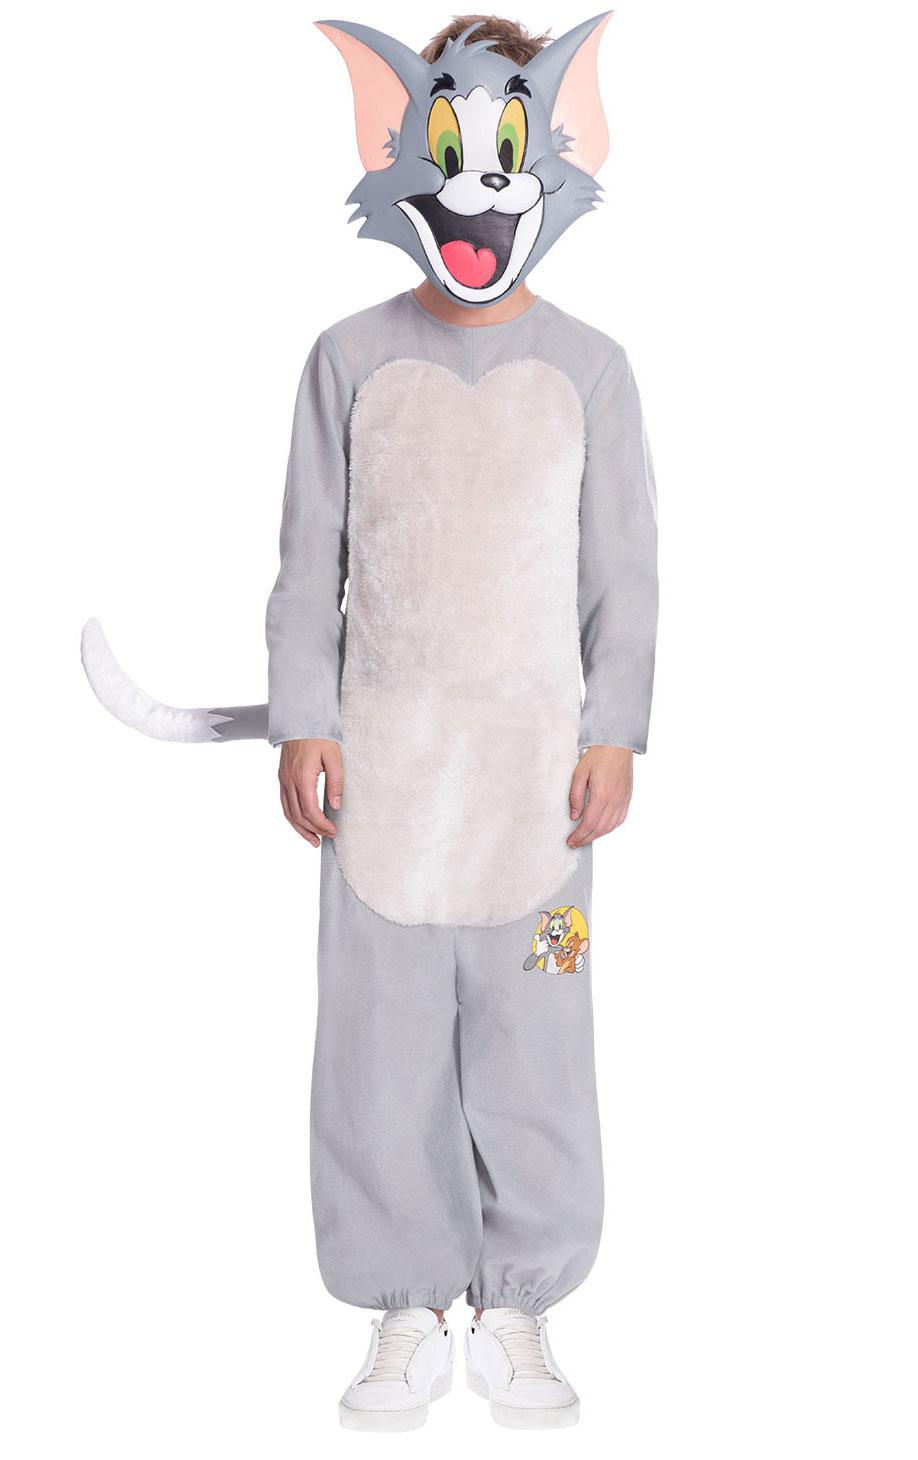 Child Tom the Cat Fancy Dress Costume by Amscan 9906656 available here at Karnival Costumes online party shop